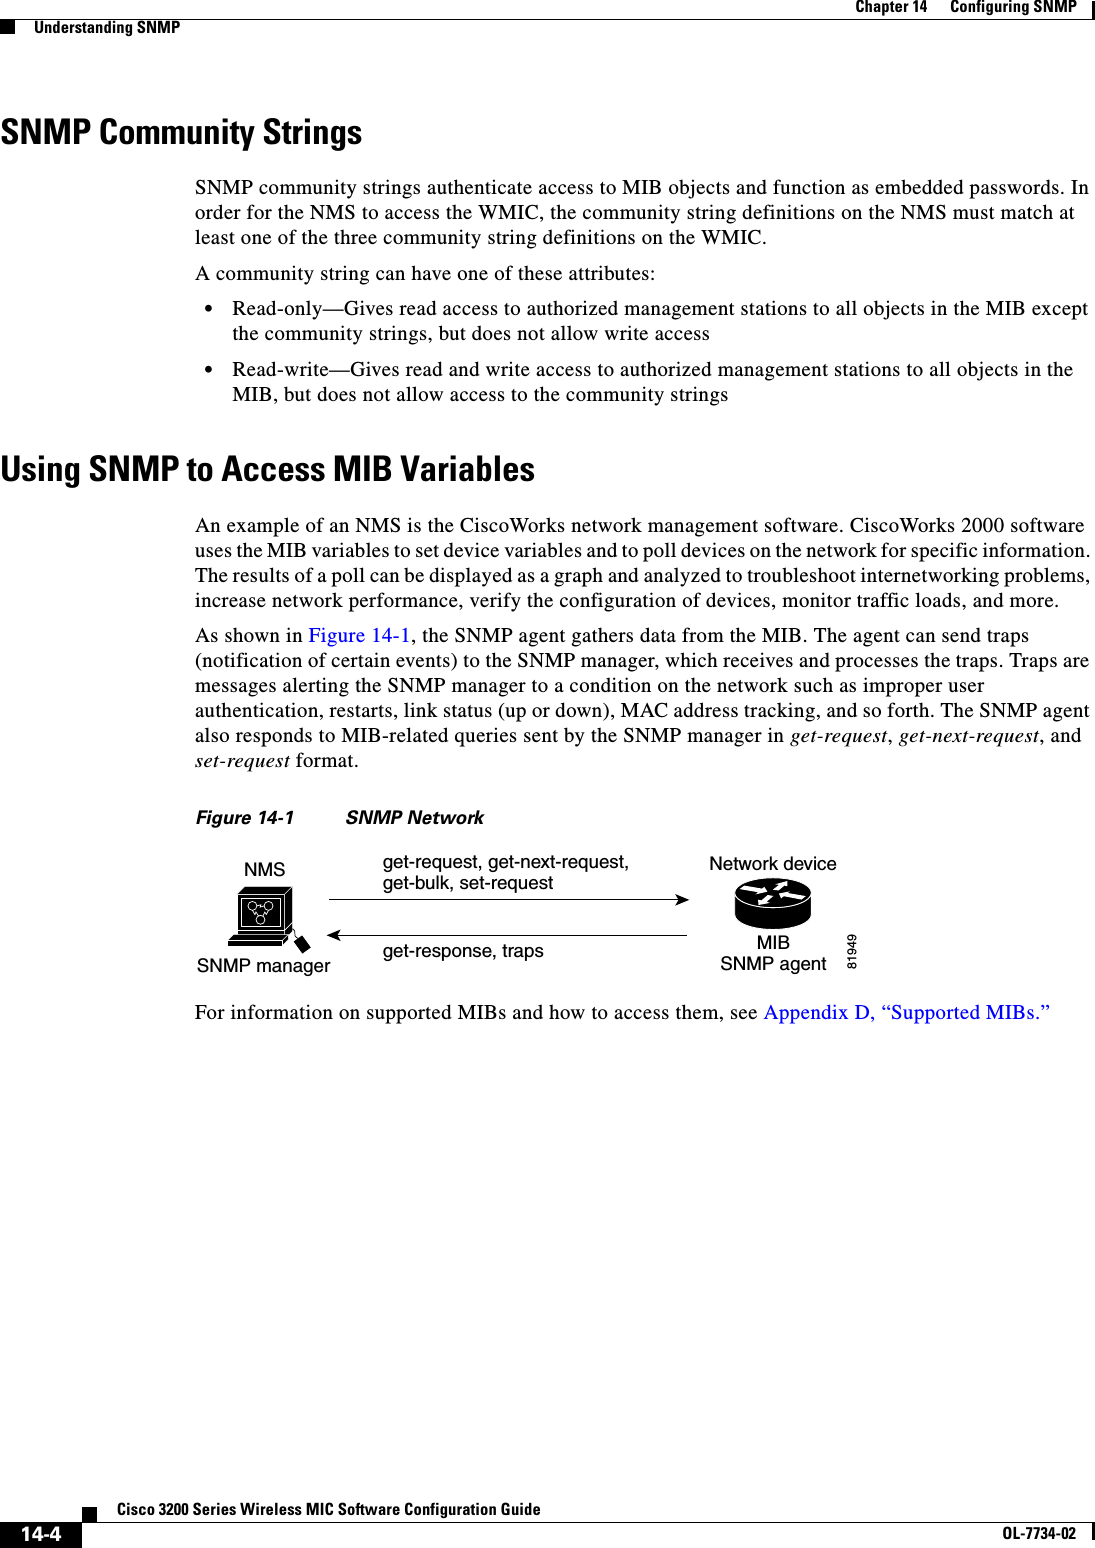 14-4Cisco 3200 Series Wireless MIC Software Configuration GuideOL-7734-02Chapter 14      Configuring SNMPUnderstanding SNMPSNMP Community StringsSNMP community strings authenticate access to MIB objects and function as embedded passwords. In order for the NMS to access the WMIC, the community string definitions on the NMS must match at least one of the three community string definitions on the WMIC.A community string can have one of these attributes:•Read-only—Gives read access to authorized management stations to all objects in the MIB except the community strings, but does not allow write access•Read-write—Gives read and write access to authorized management stations to all objects in the MIB, but does not allow access to the community stringsUsing SNMP to Access MIB Variables An example of an NMS is the CiscoWorks network management software. CiscoWorks 2000 software uses the MIB variables to set device variables and to poll devices on the network for specific information. The results of a poll can be displayed as a graph and analyzed to troubleshoot internetworking problems, increase network performance, verify the configuration of devices, monitor traffic loads, and more.As shown in Figure 14-1, the SNMP agent gathers data from the MIB. The agent can send traps (notification of certain events) to the SNMP manager, which receives and processes the traps. Traps are messages alerting the SNMP manager to a condition on the network such as improper user authentication, restarts, link status (up or down), MAC address tracking, and so forth. The SNMP agent also responds to MIB-related queries sent by the SNMP manager in get-request,get-next-request, and set-request format. Figure 14-1 SNMP NetworkFor information on supported MIBs and how to access them, see Appendix D, “Supported MIBs.”get-request, get-next-request,get-bulk, set-requestNetwork deviceget-response, traps 81949SNMP managerNMSMIBSNMP agent